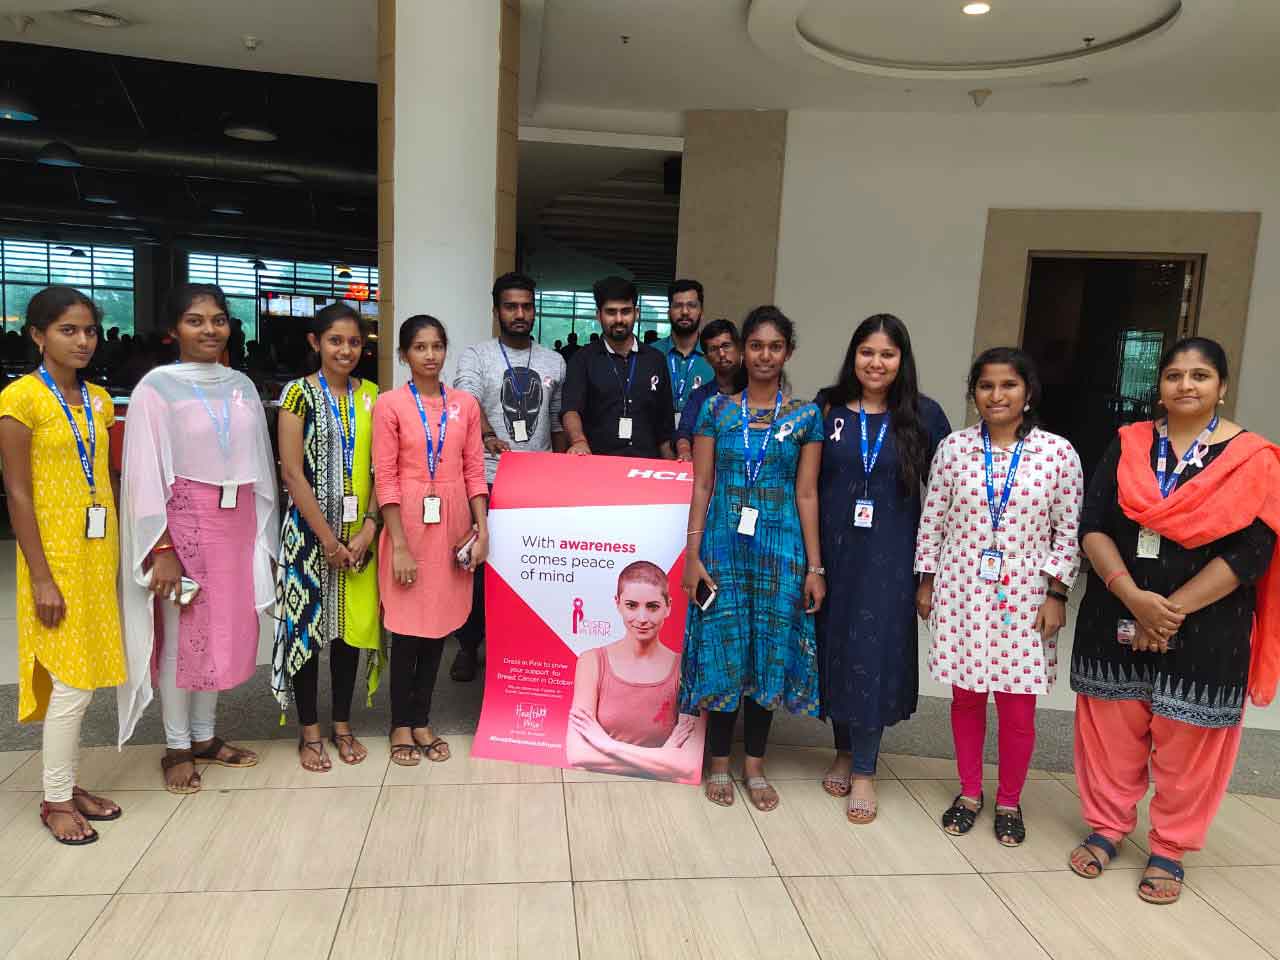 On ground HCLTech team engaged the employees in Chennai Campus to drive awareness